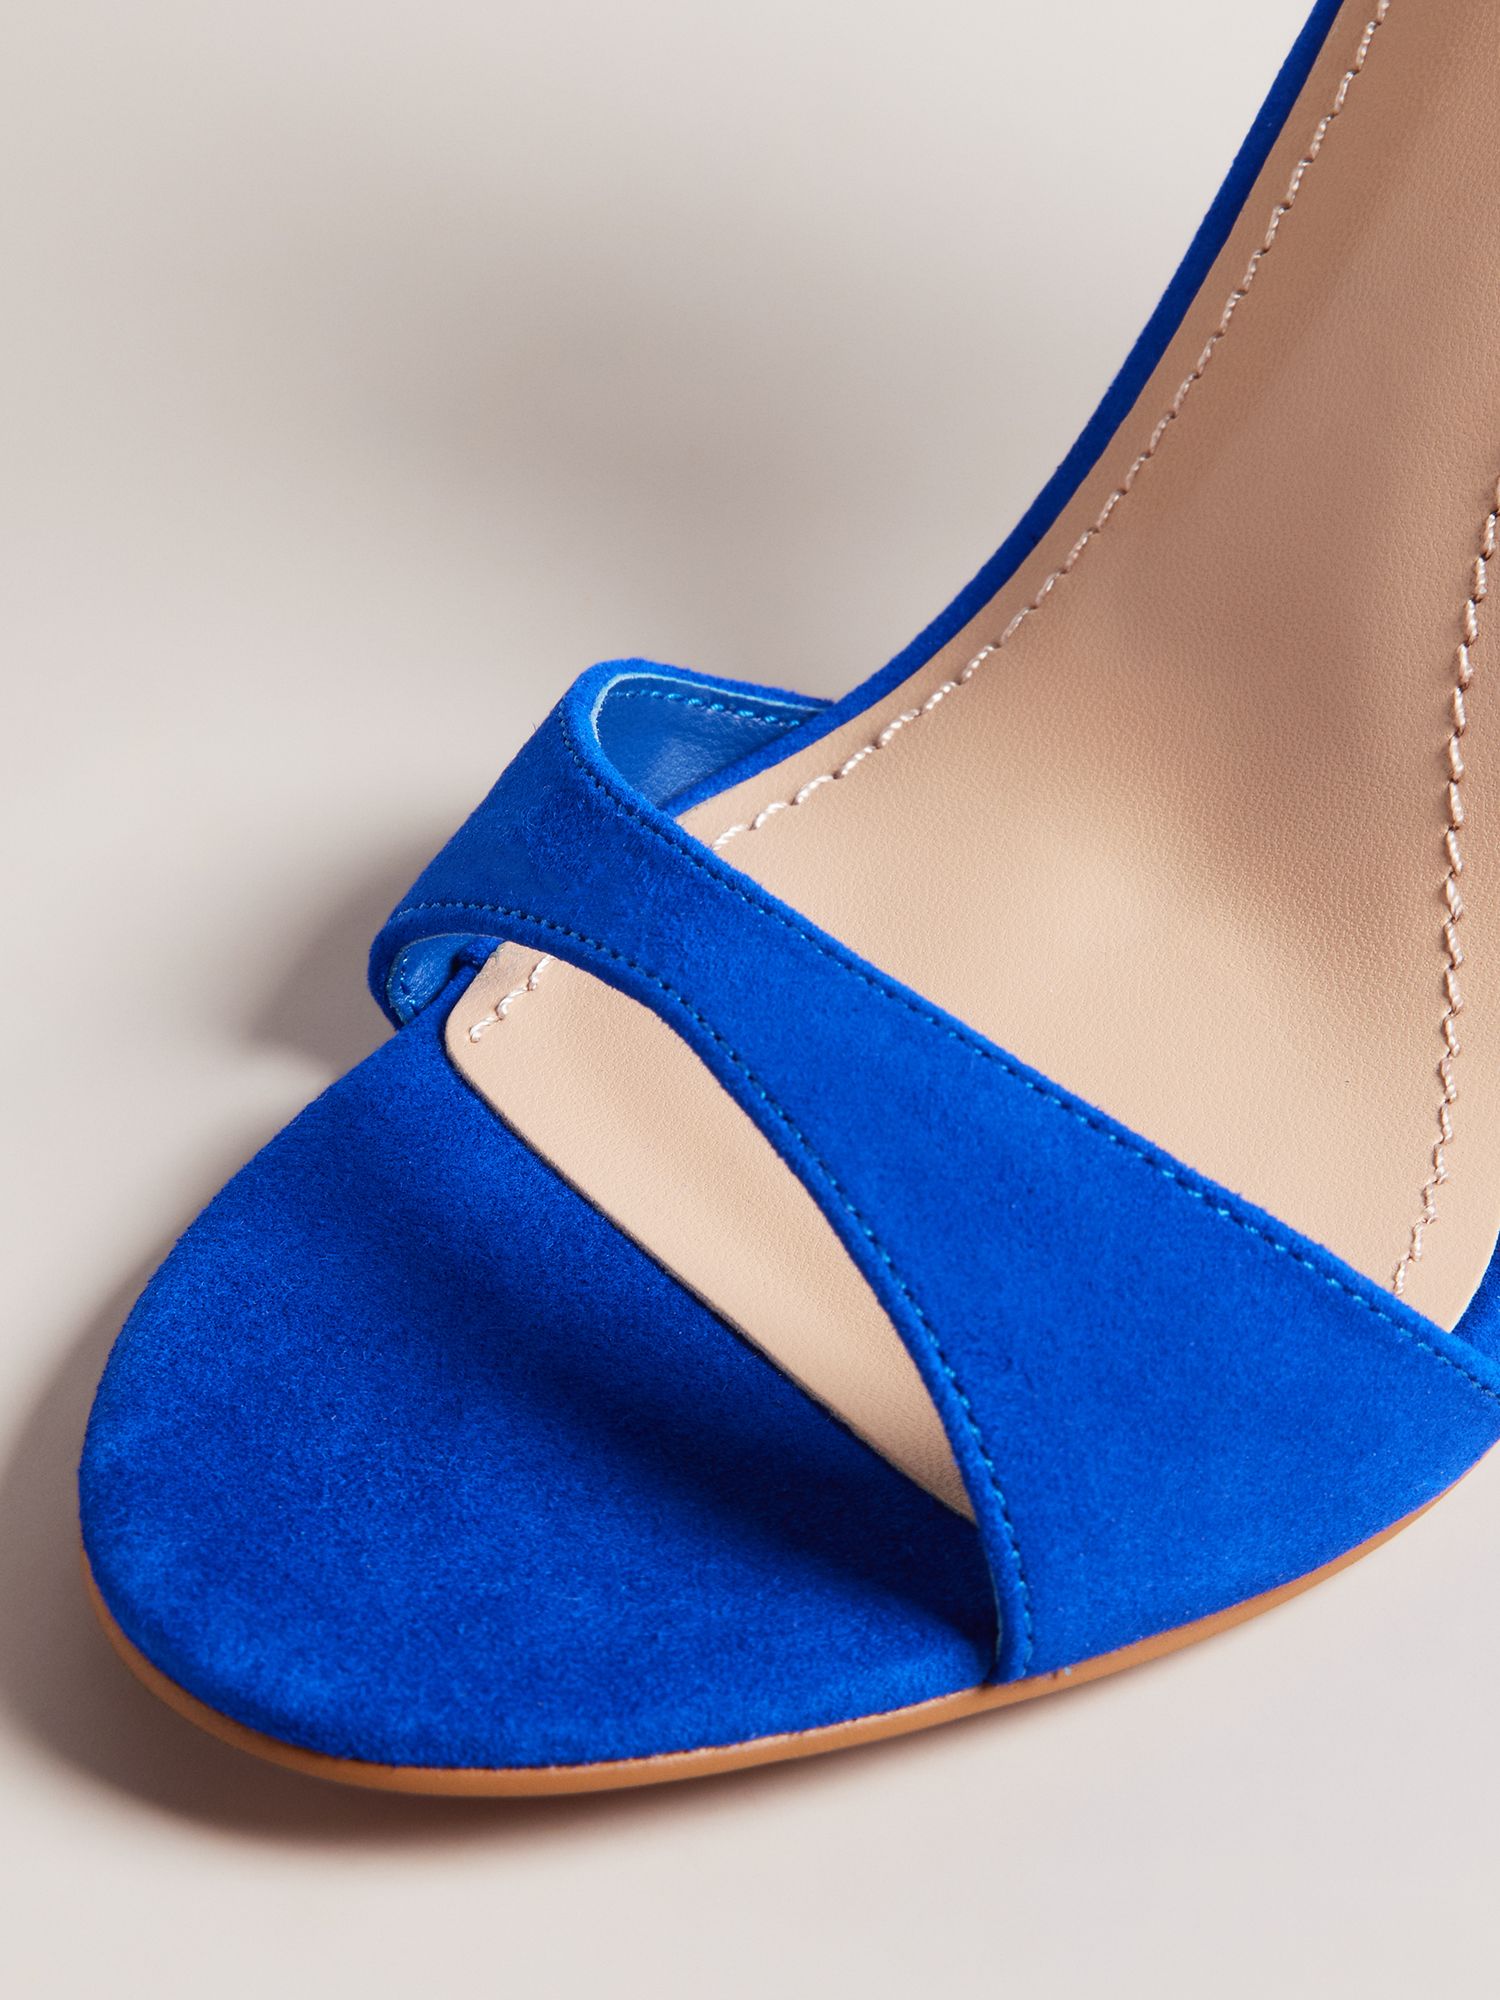 Ted Baker Helmias Suede Heeled Sandals, Bright Blue at John Lewis ...